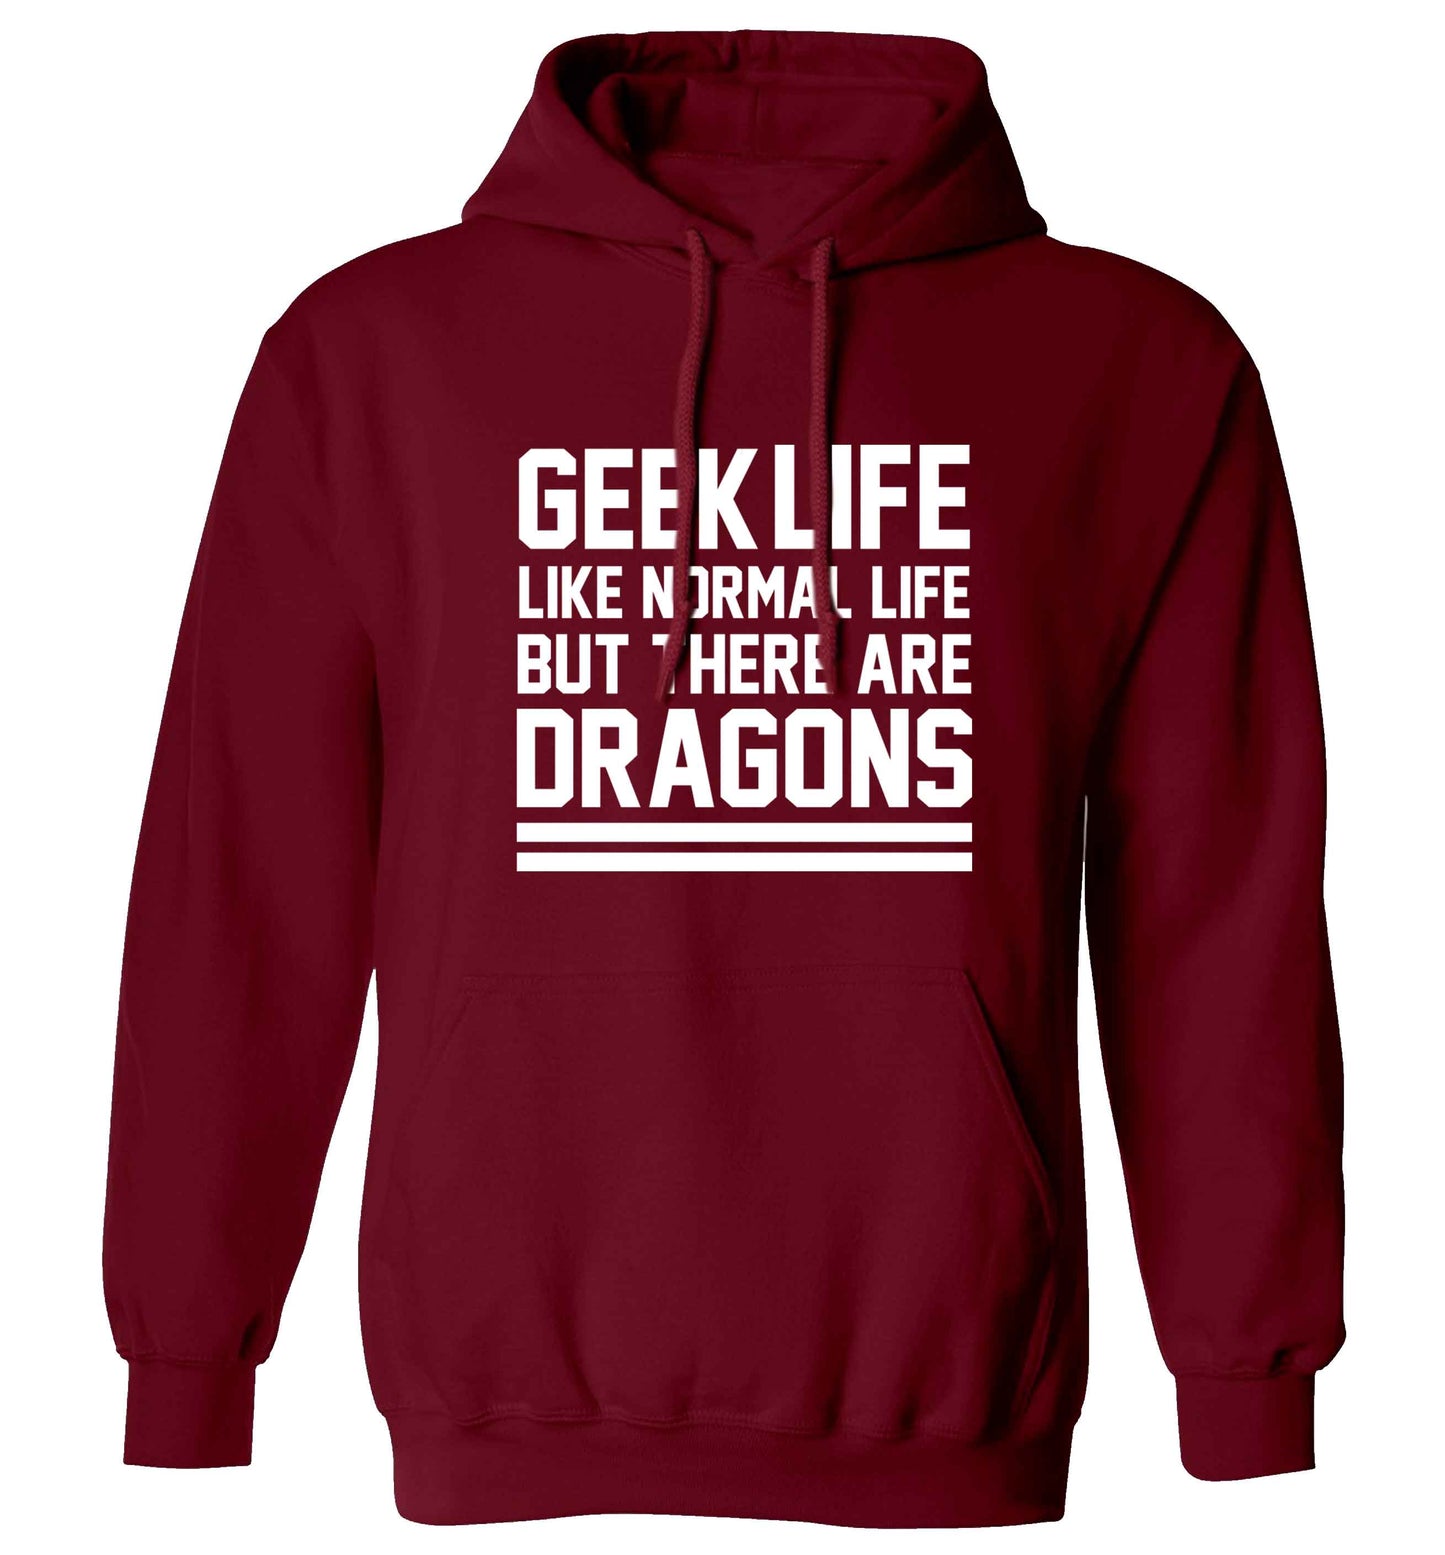 Geek life like normal life but there are dragons adults unisex maroon hoodie 2XL